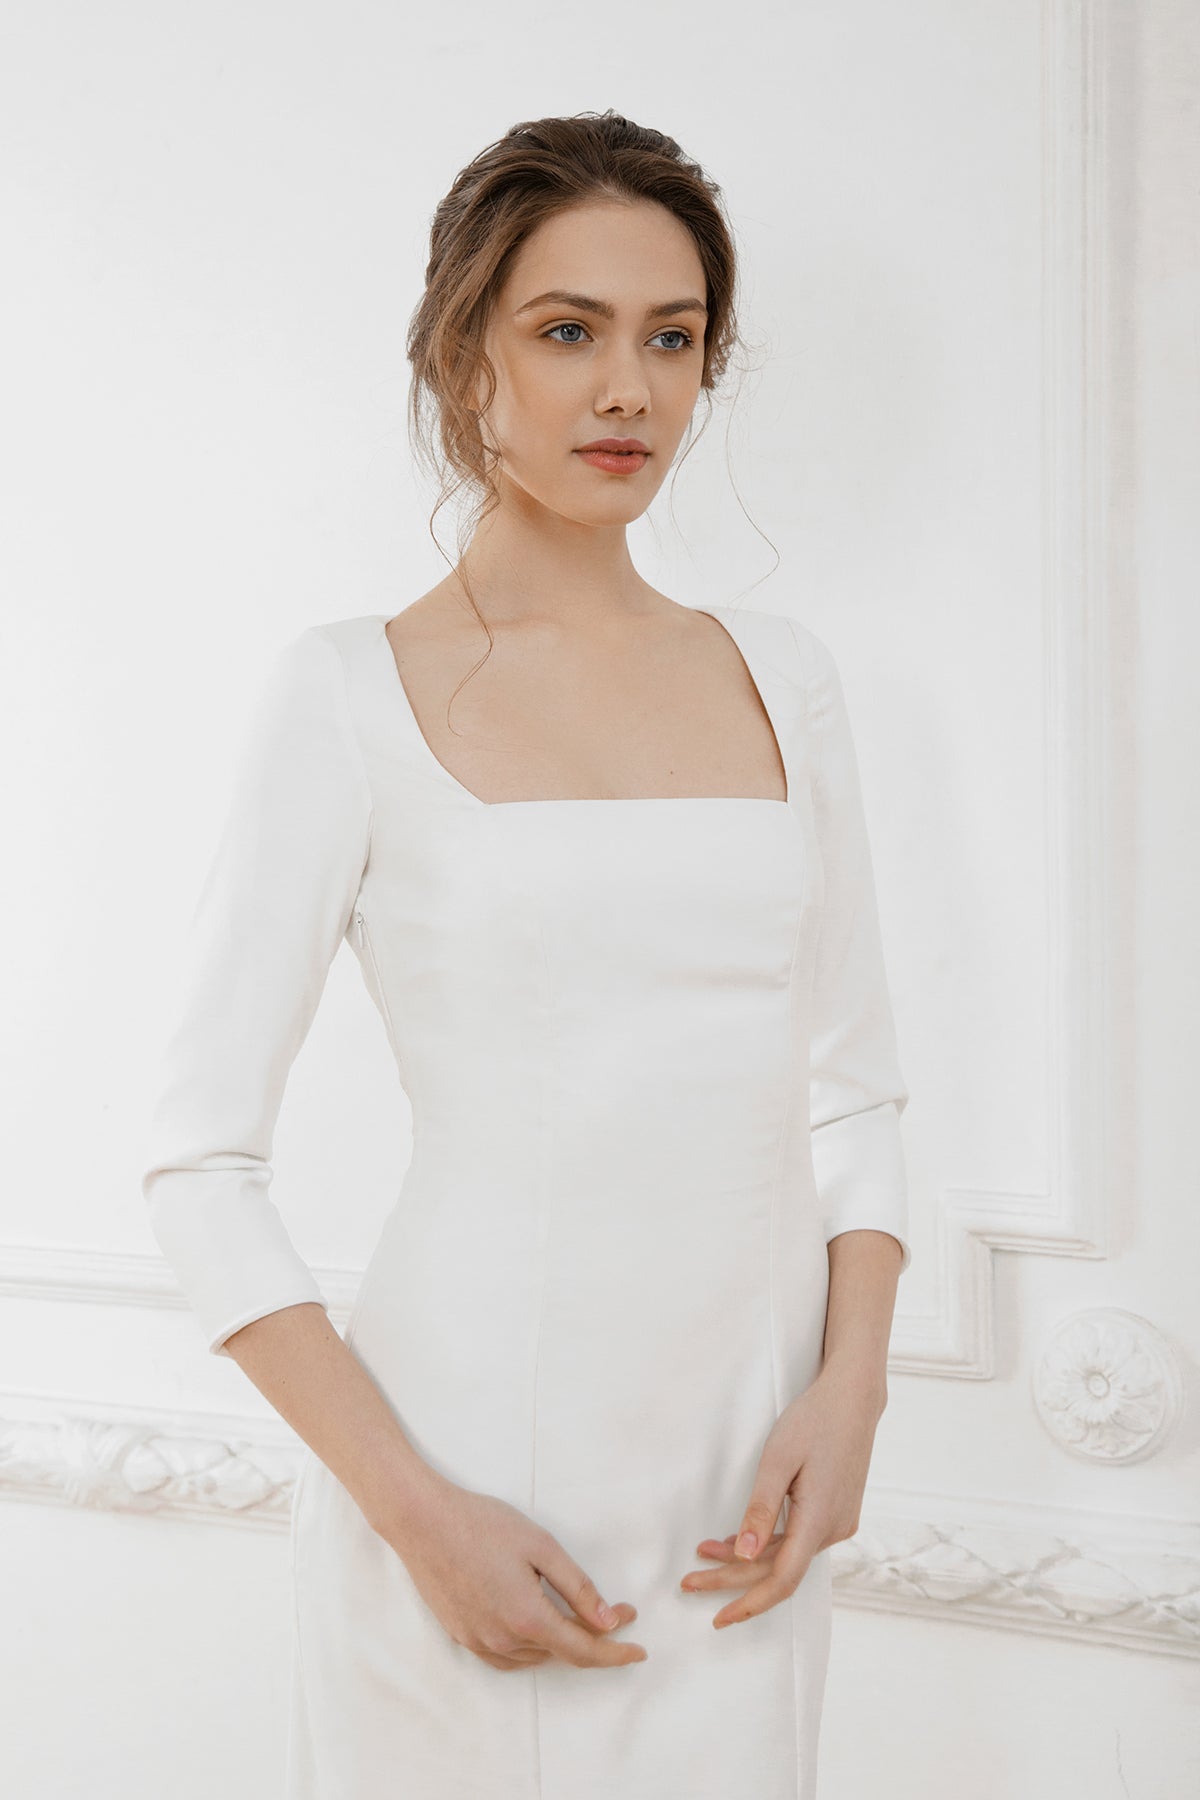 Sexy wedding dress with square neckline • simple wedding dress • crepe wedding dress • reception dress • long sleeve dress